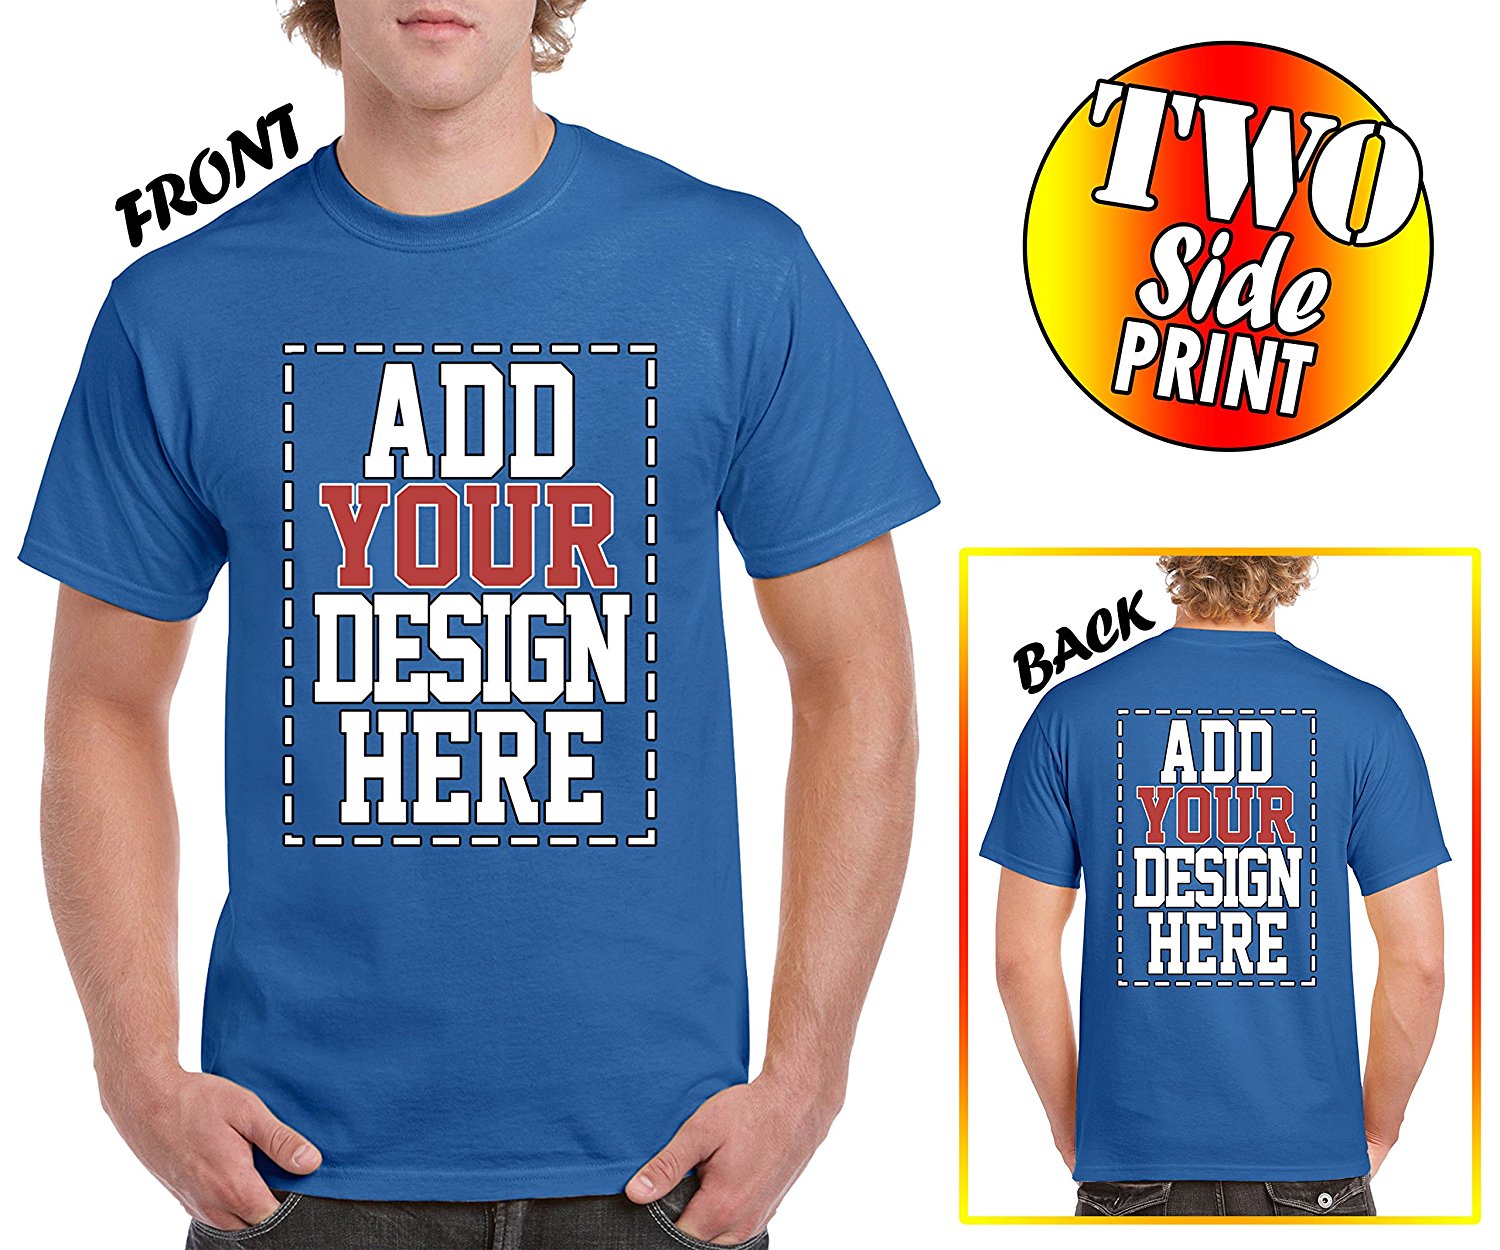 Custom 2 Sided T Shirts Design Your Own Shirt Front And Back